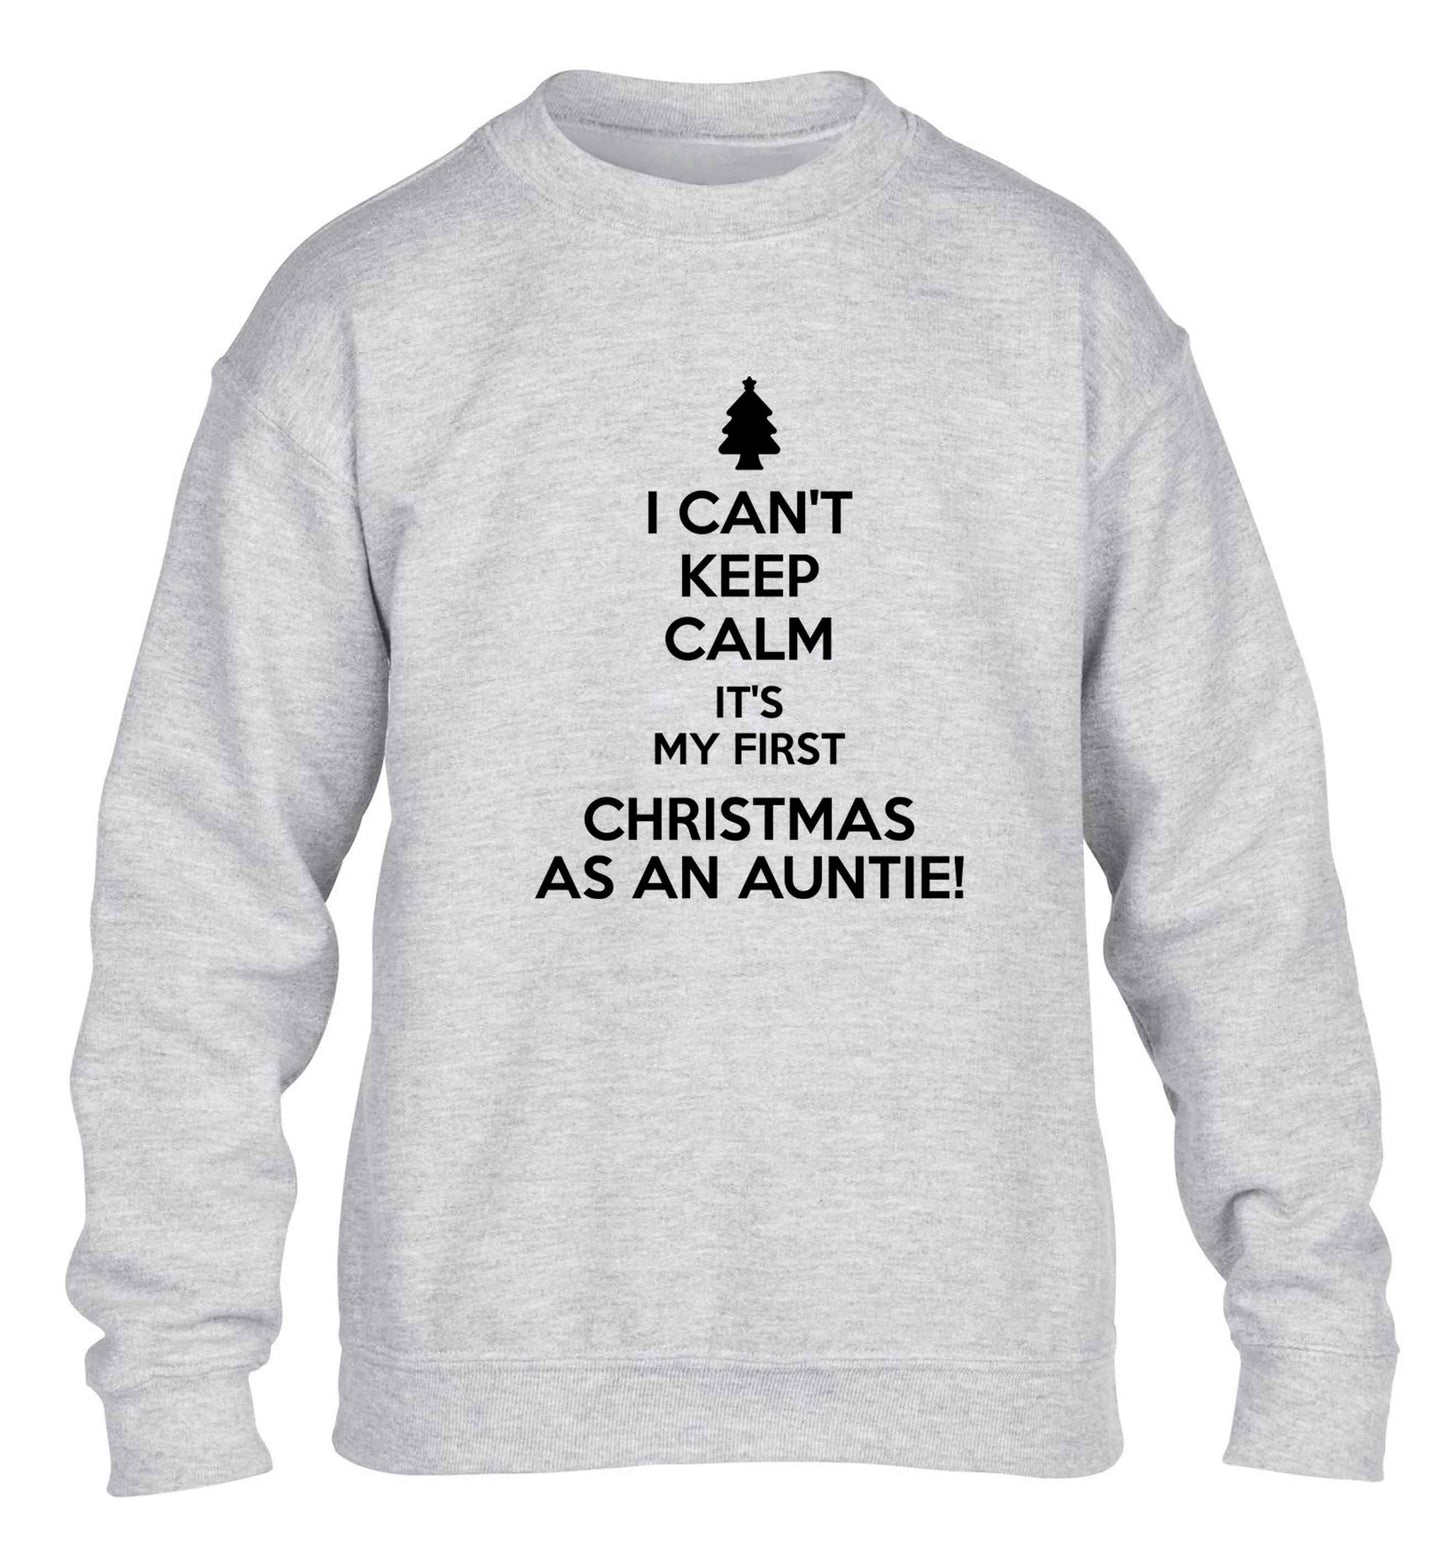 I can't keep calm it's my first Christmas as an auntie! children's grey sweater 12-13 Years